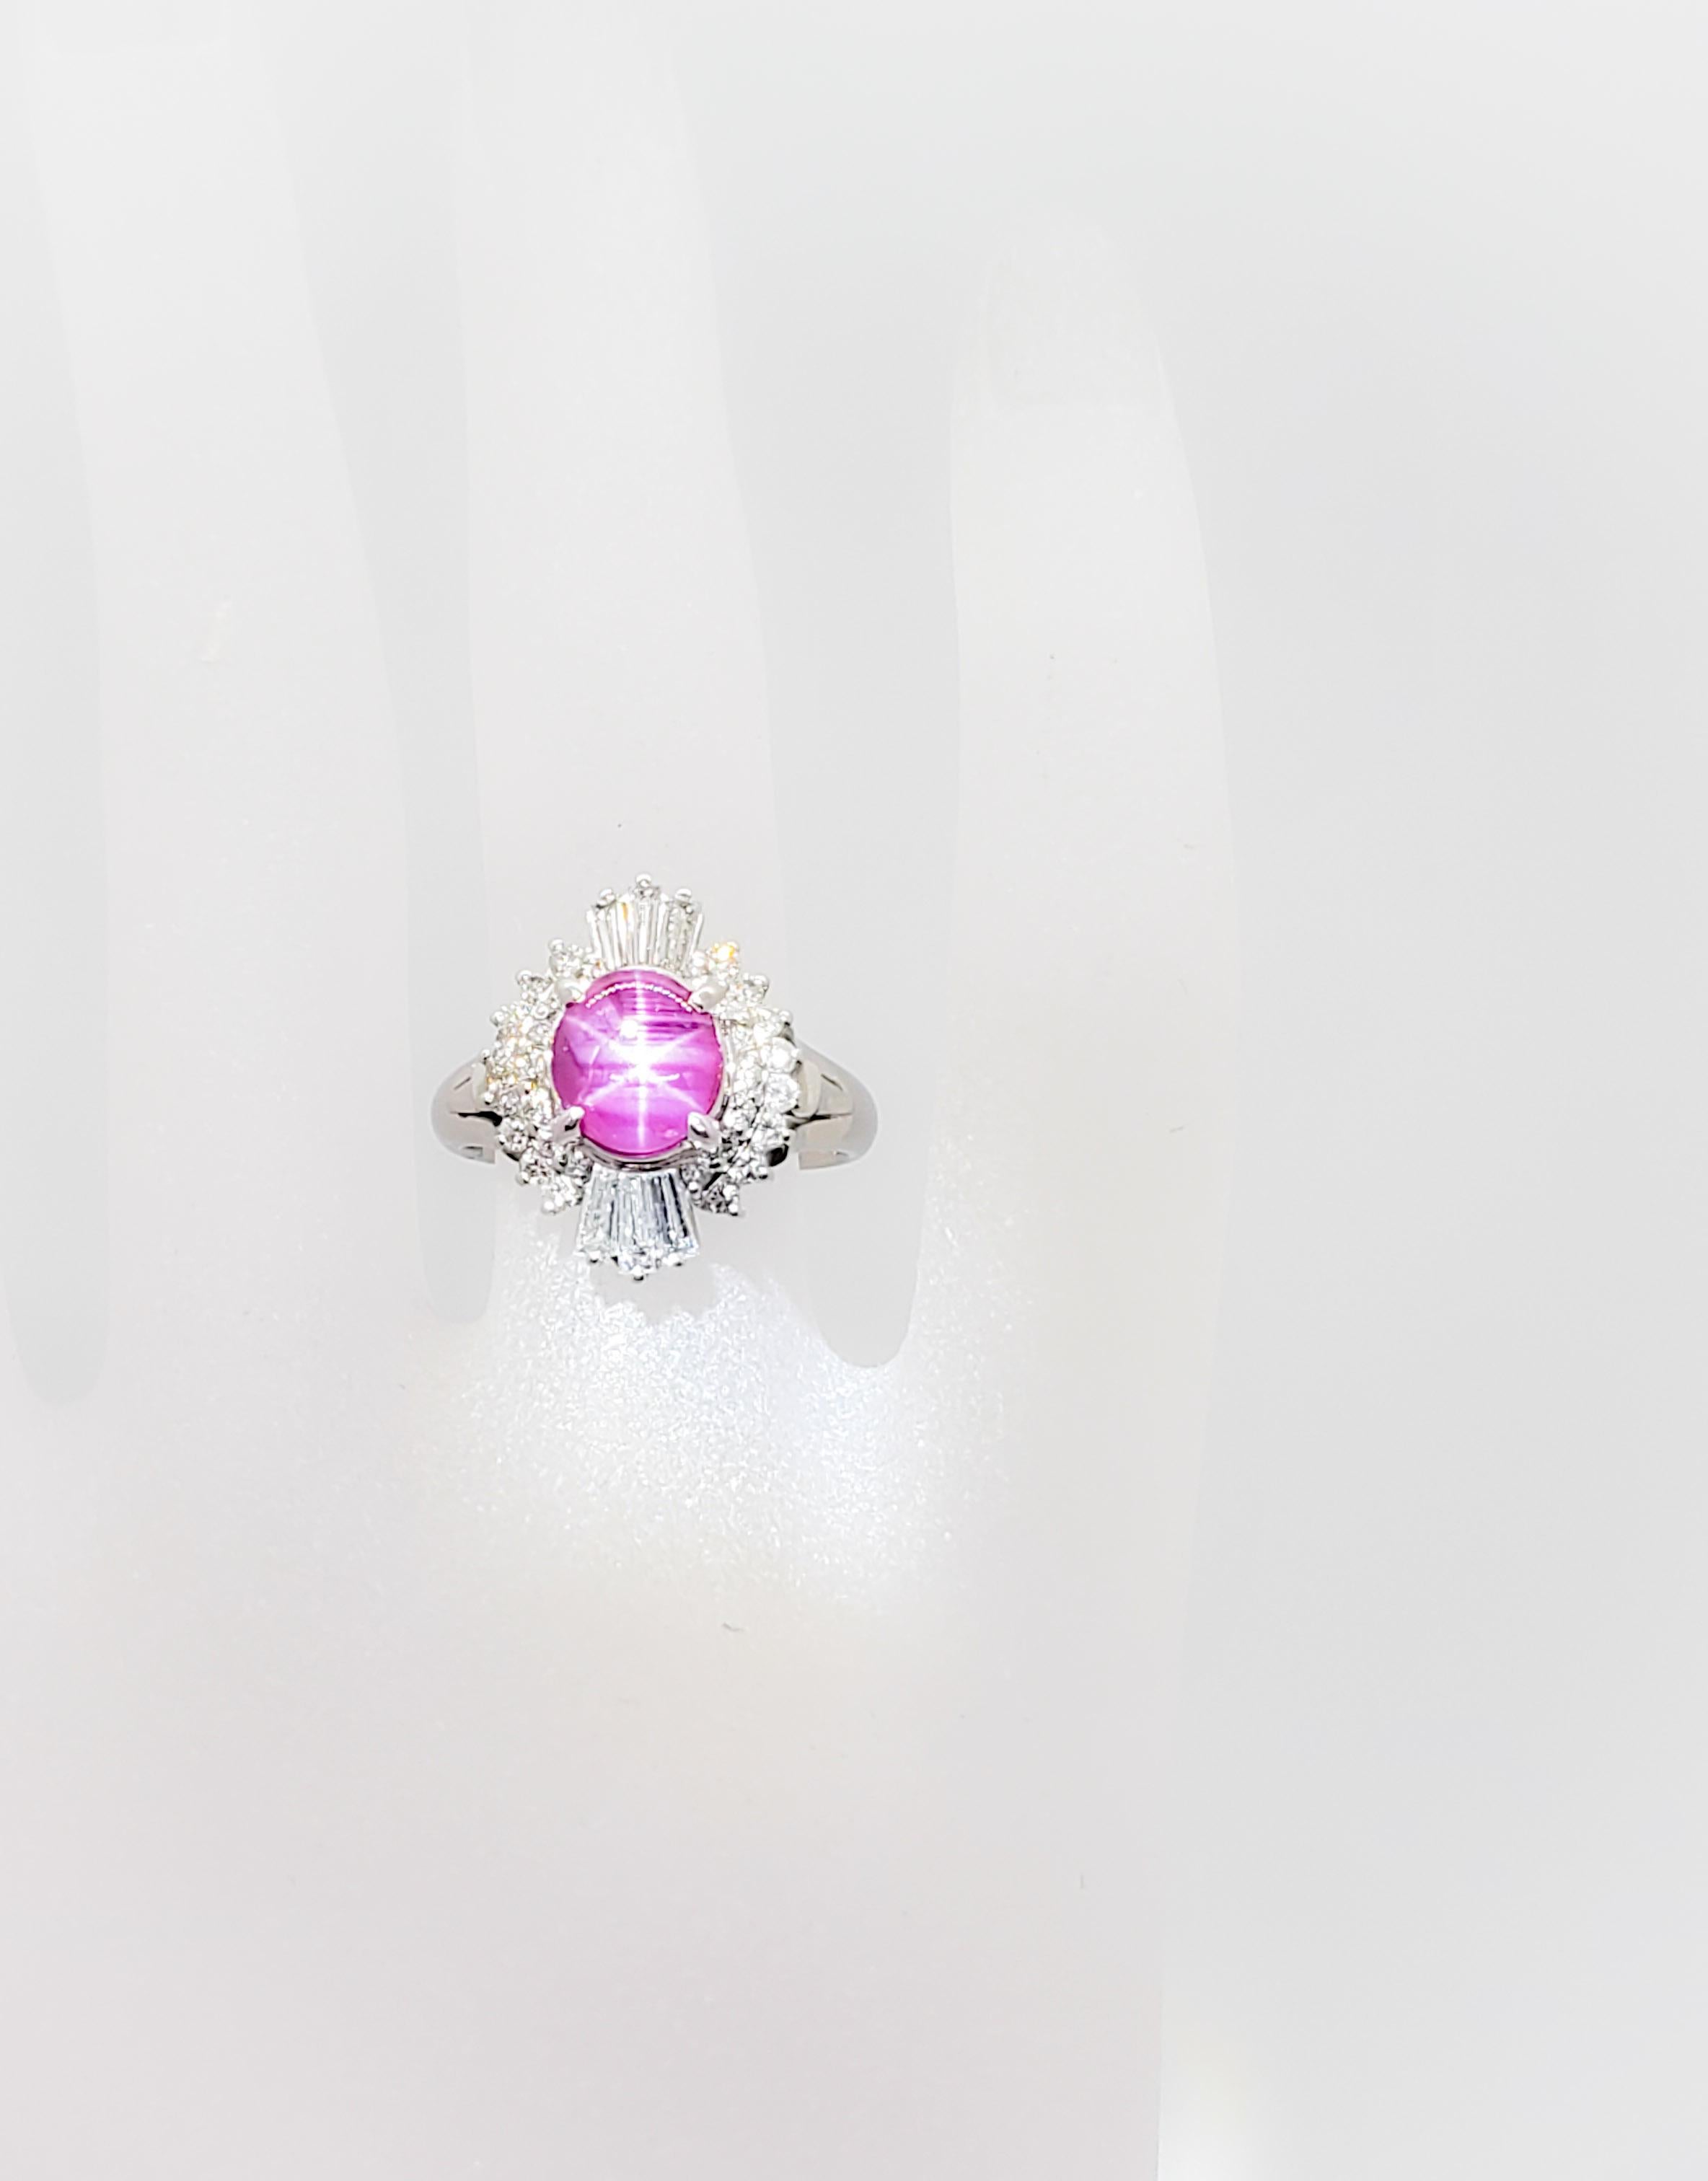 Stunning 3.33 ct. star ruby oval cabochon and 0.82 ct. of good quality white diamond rounds and baguettes in this cocktail ring.  The star is bright and prominent.  Handmade in platinum, ring size 6.5.  Estate piece in mint condition.